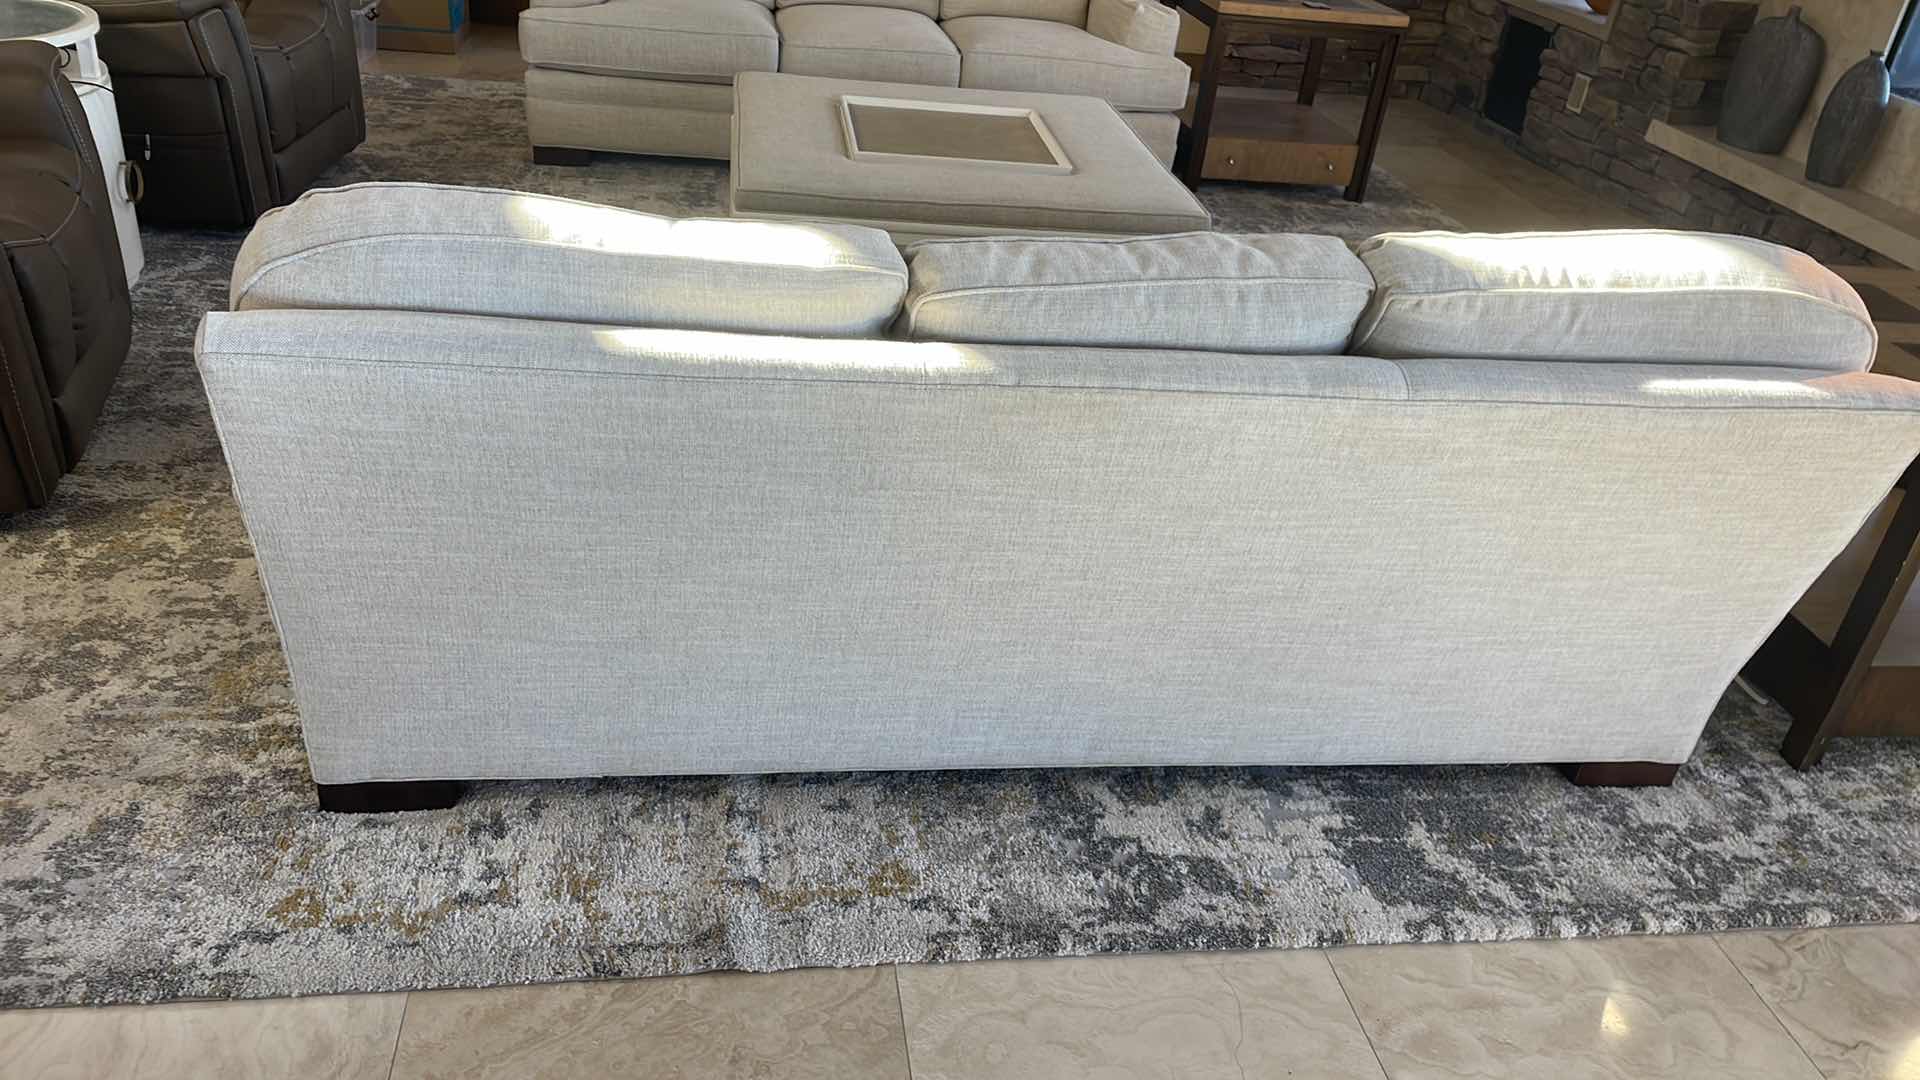 Photo 4 of TAYLOR MADE SOFA BY TAYLOR KING ATTACHED BACK CUSHIONS LAMSON LINEN FINISH FABRIC 87” X 40”